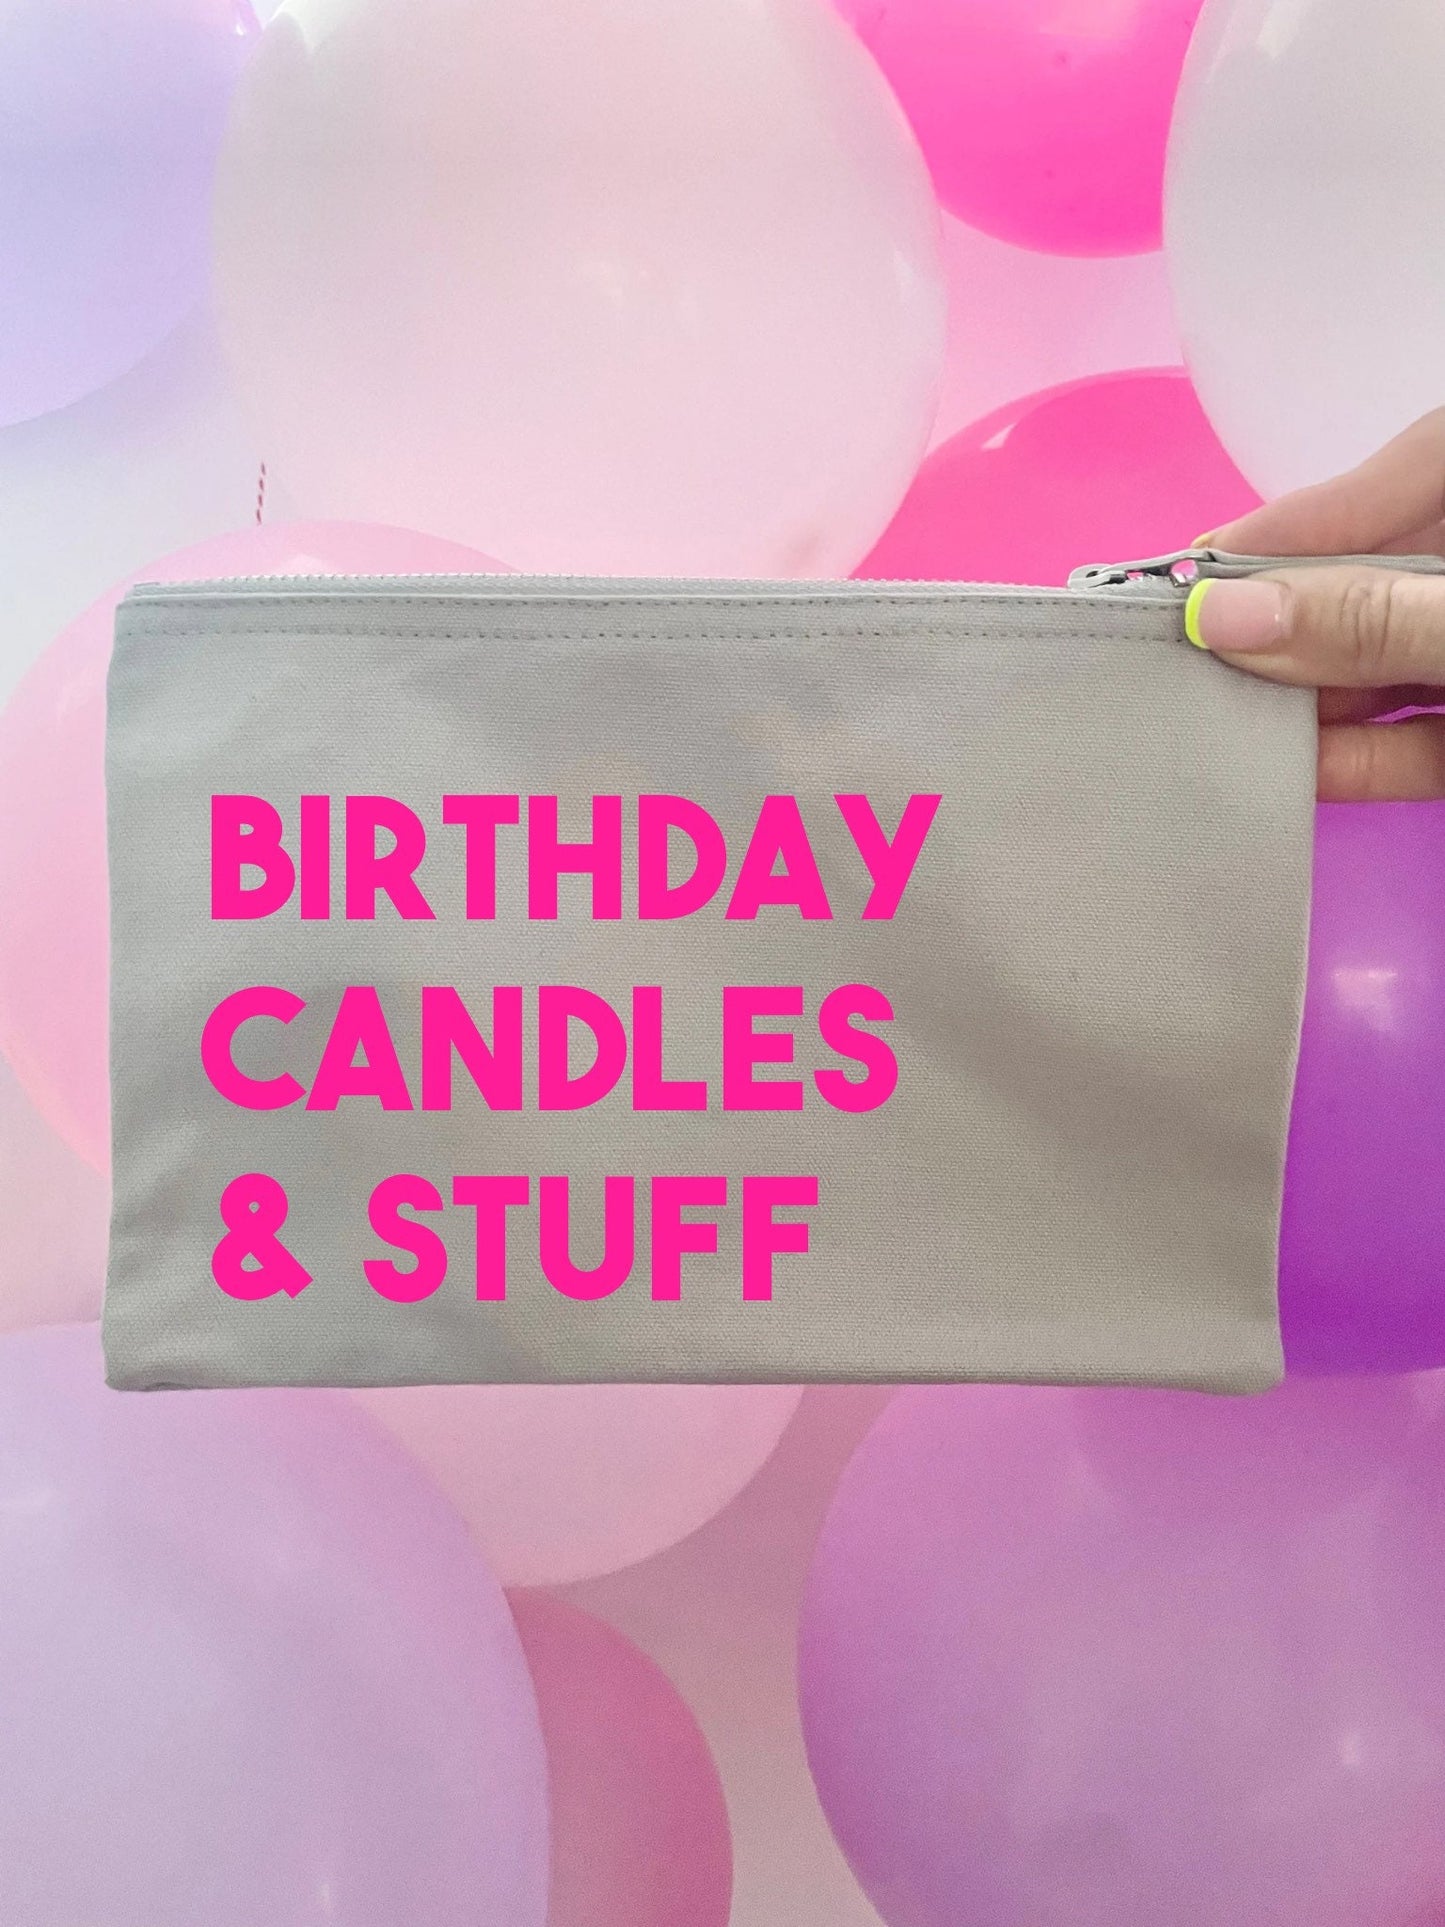 Birthday party candles & stuff case, birthday cake candle storage, cotton pouch to store party essentials, balloons candles, cake toppers,